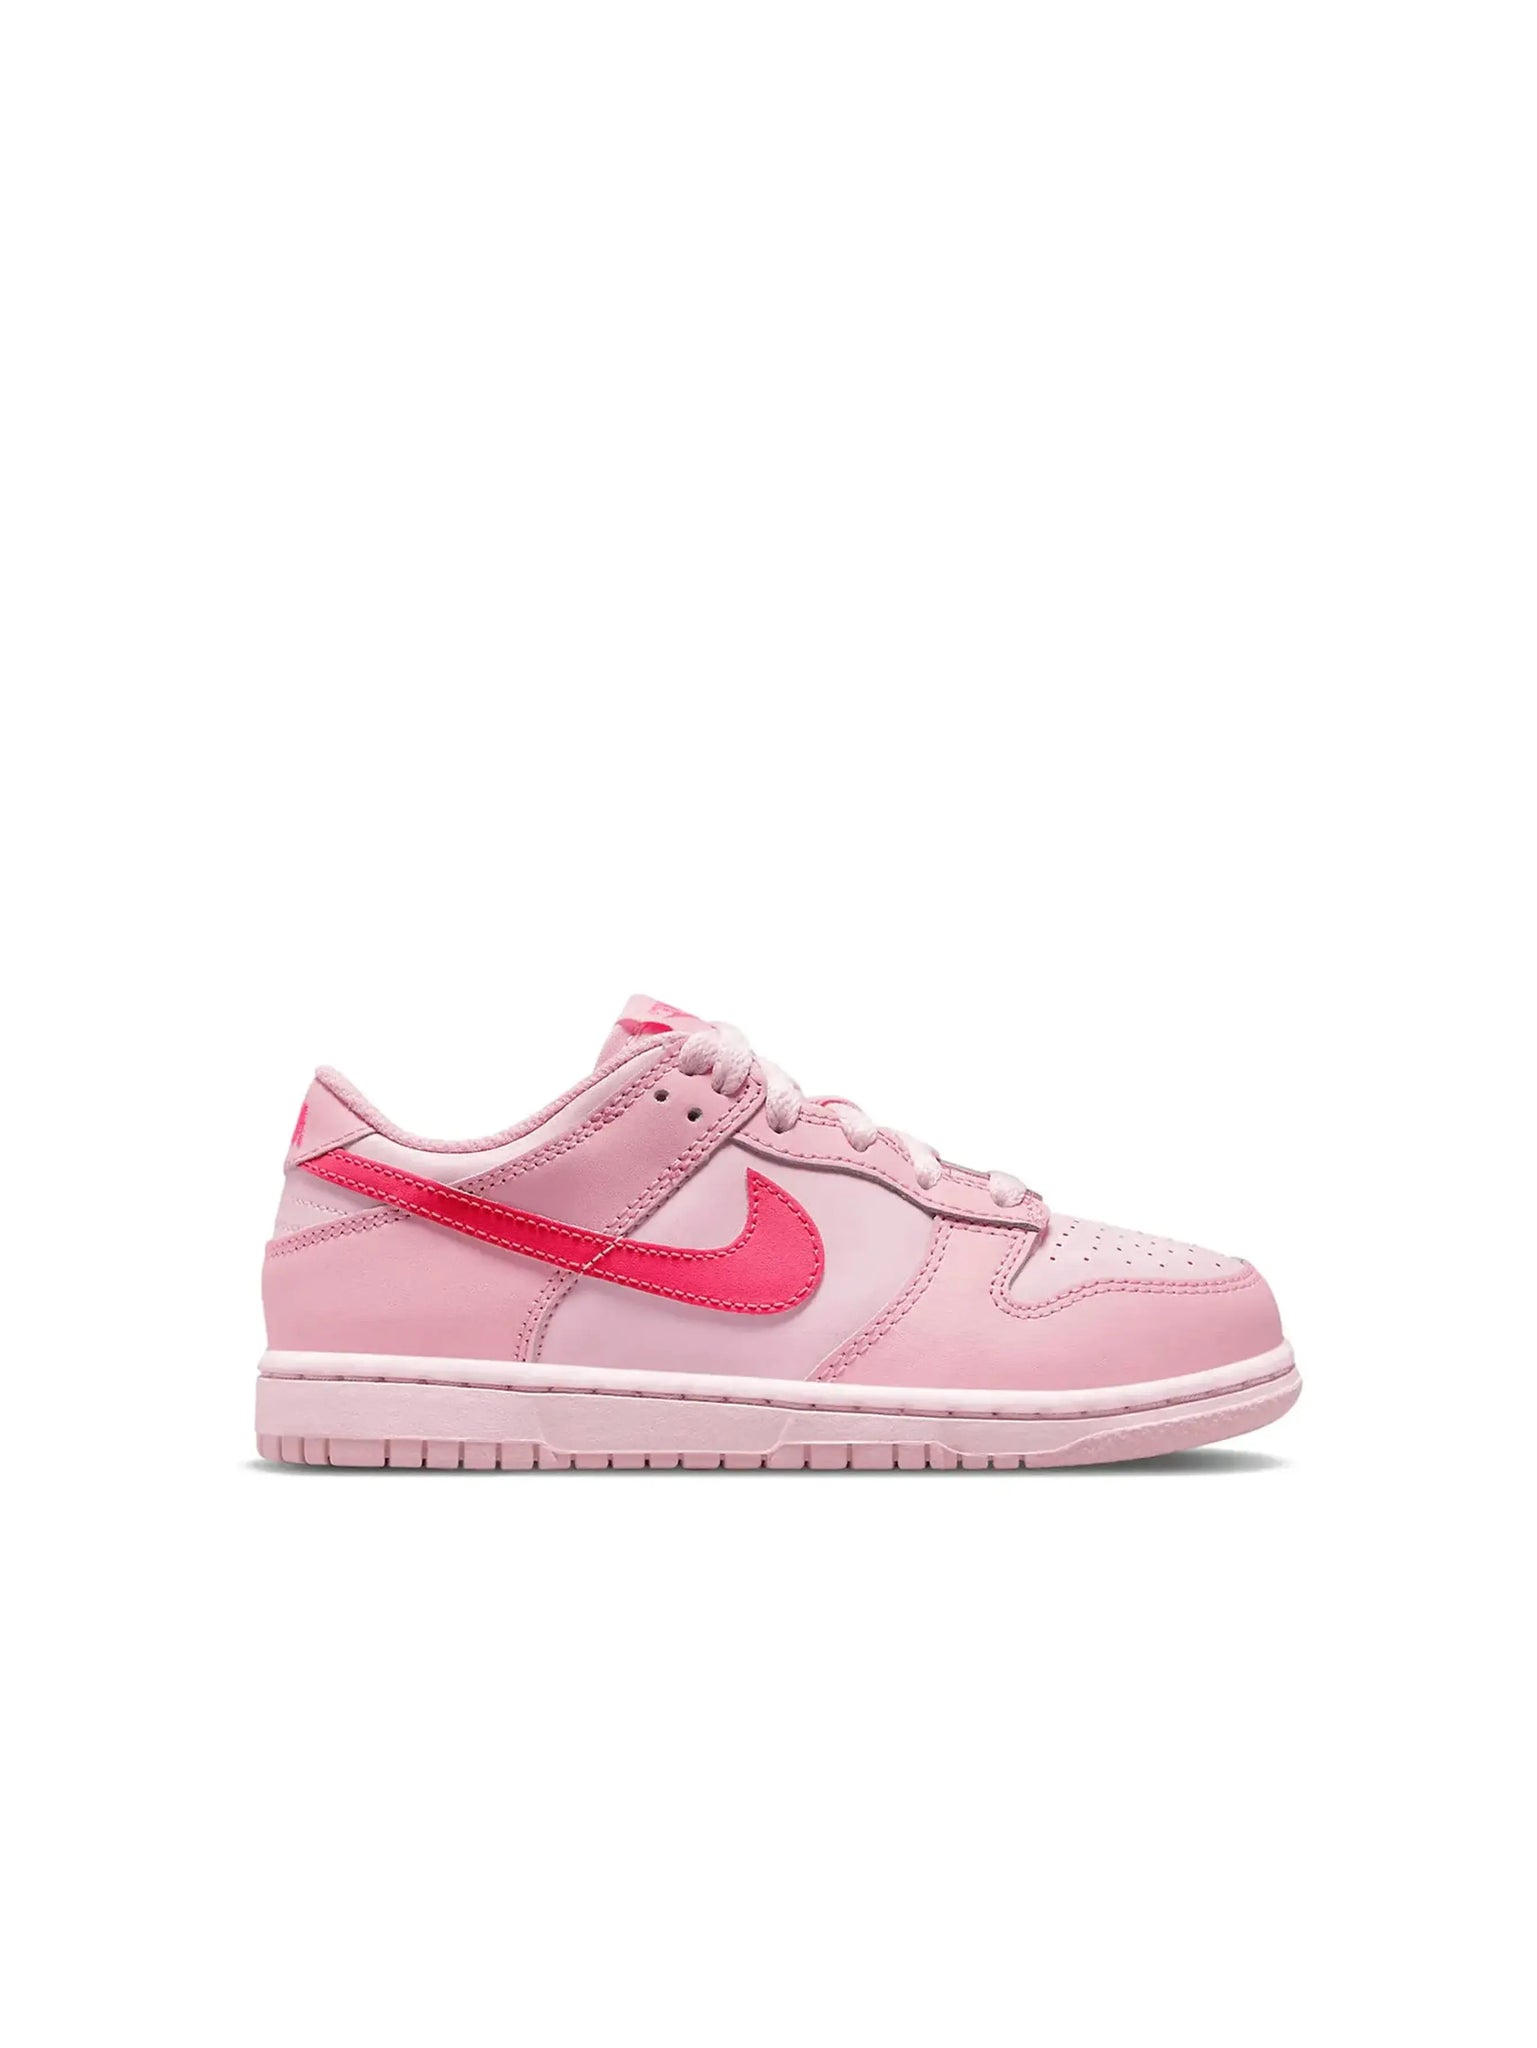 Nike Dunk Low Triple Pink (PS) in Melbourne, Australia - Prior